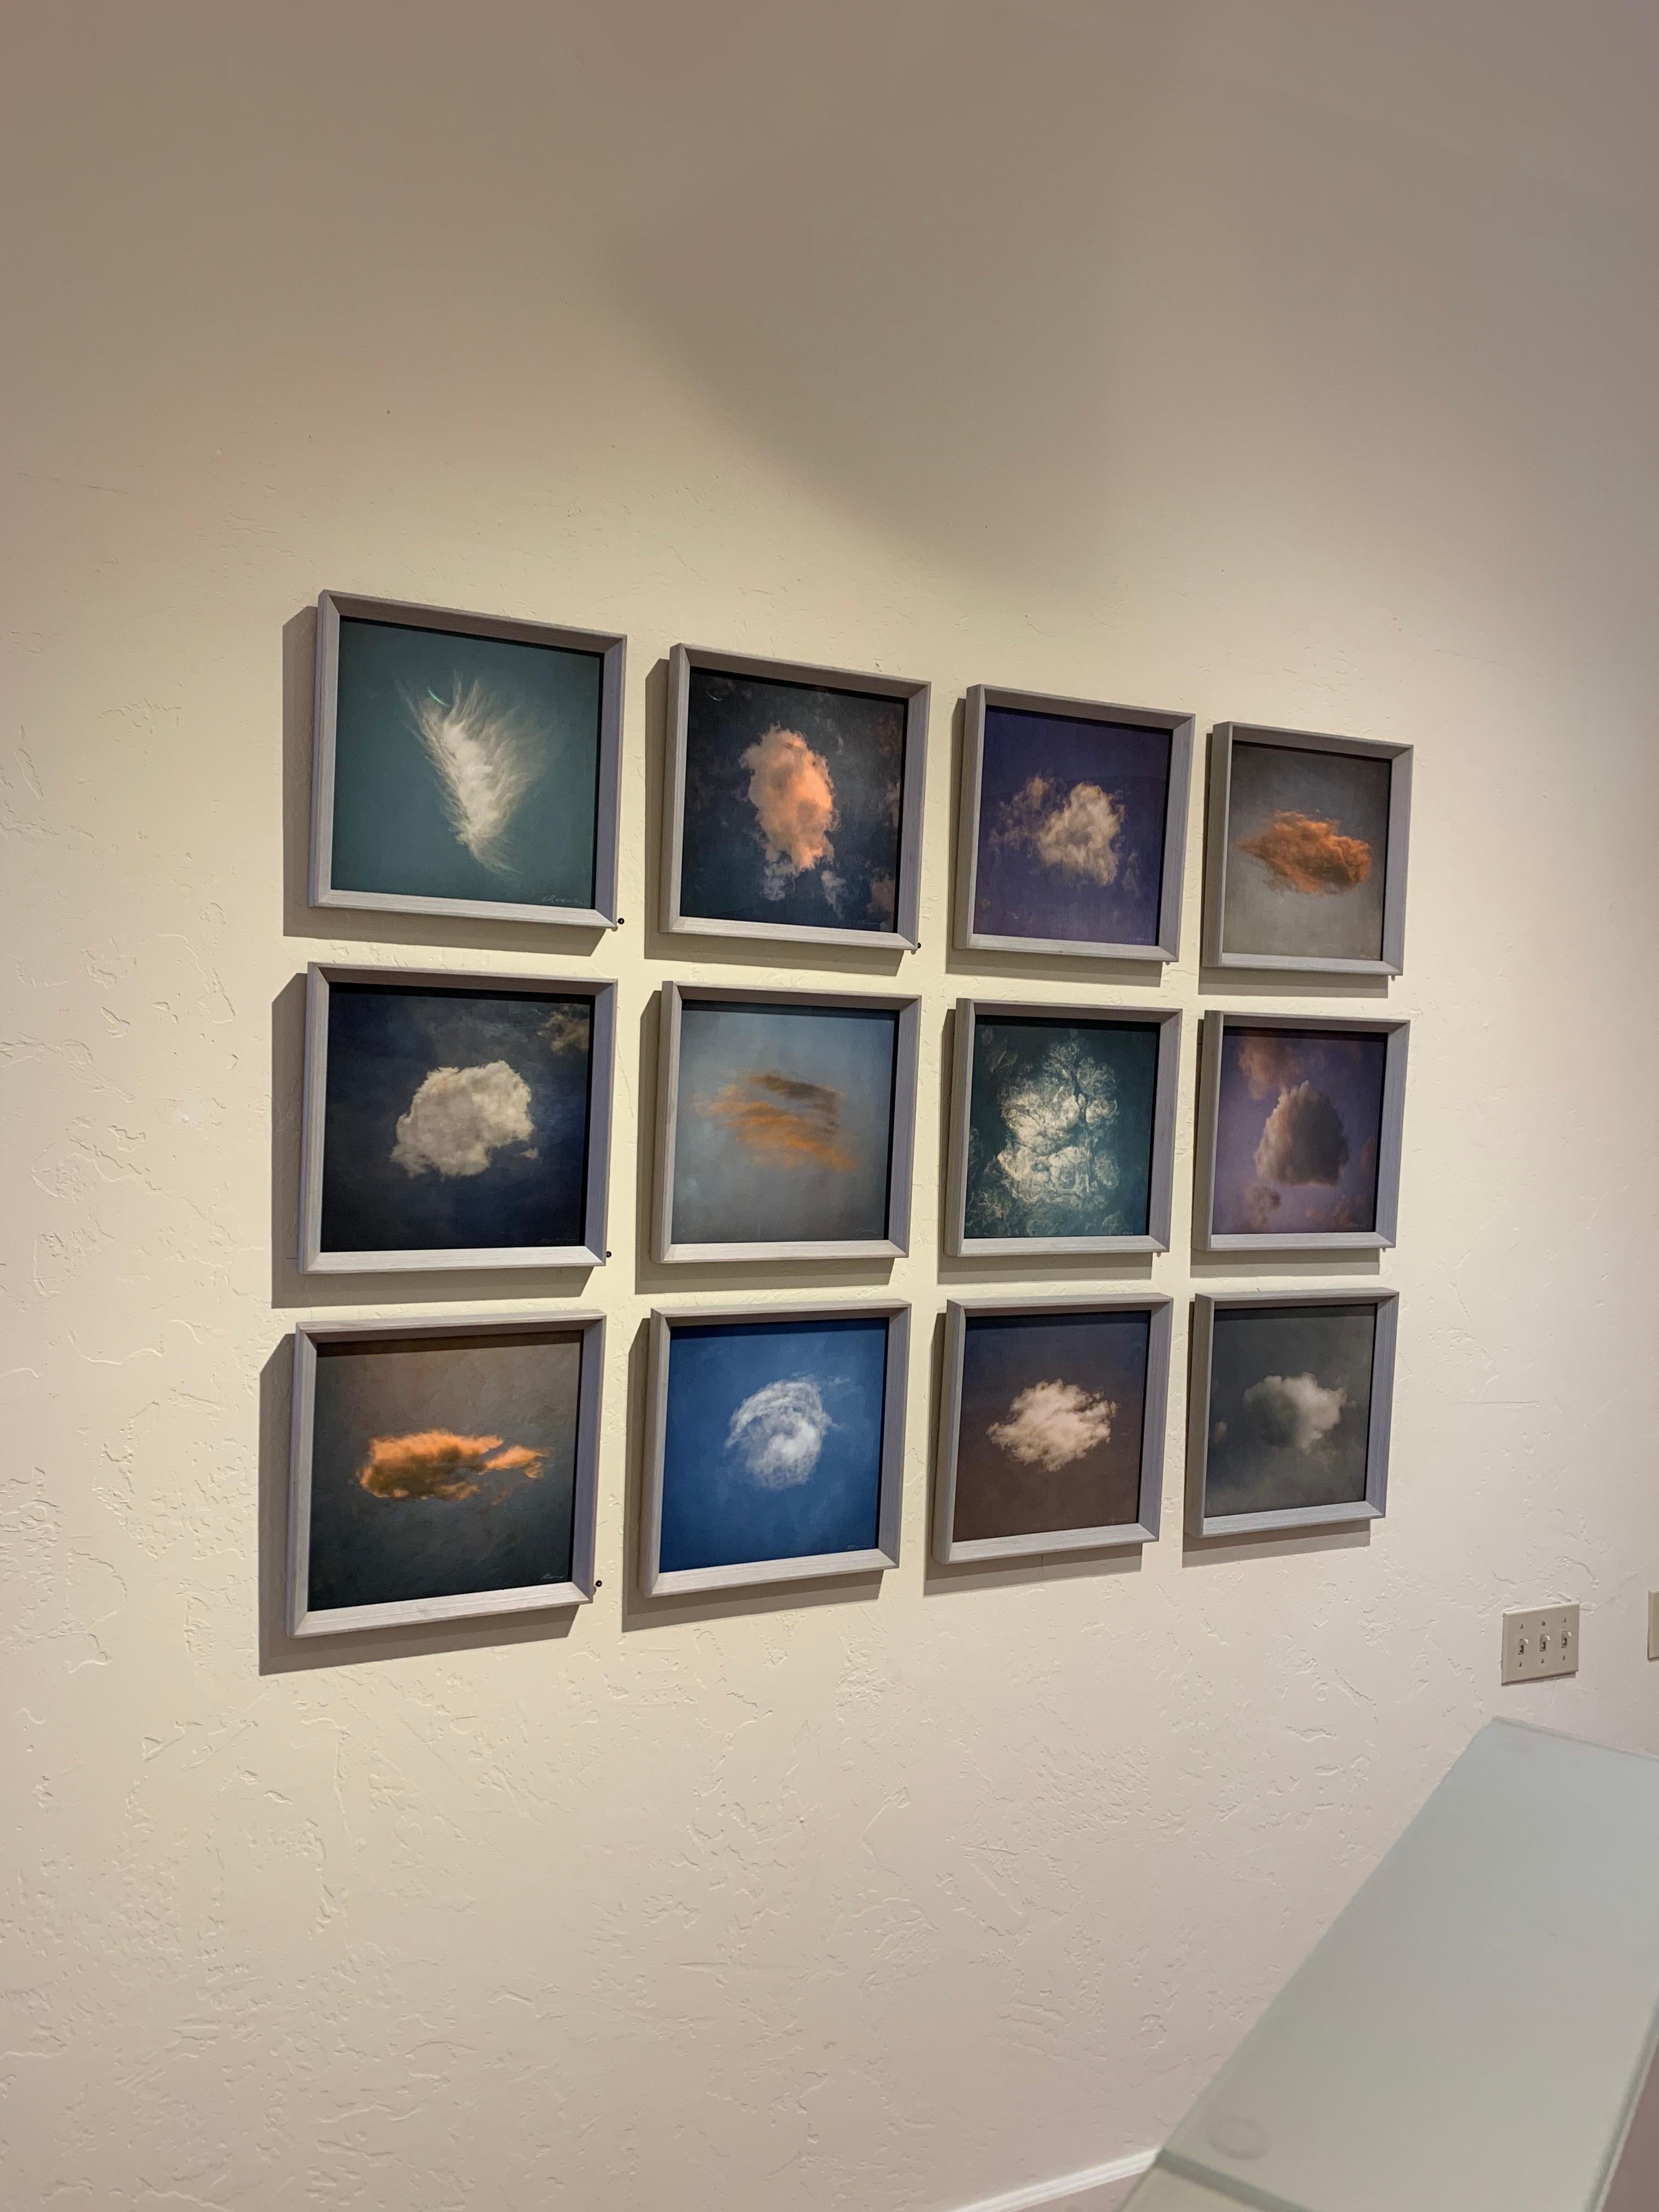 Twelve Clouds, Softly, Slowly (L) - Photograph by Kate Breakey